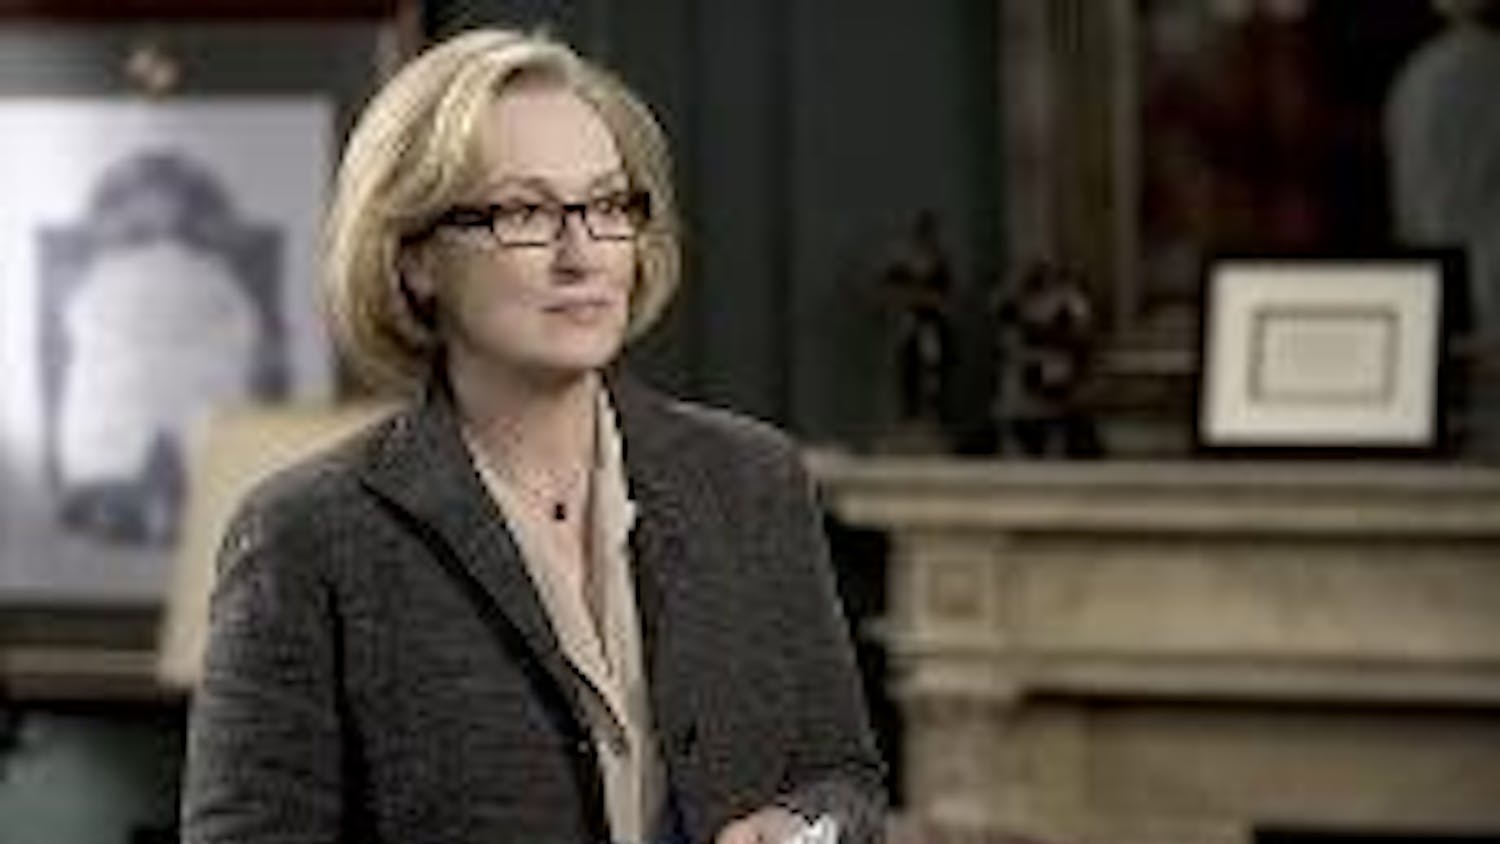 STAR REPORTER - Meryl Streep stars as hard-hitting reporter Janine Roth in a new political drama directed by Robert Redford. The film presents different points of view on the current state of the war on terror. 